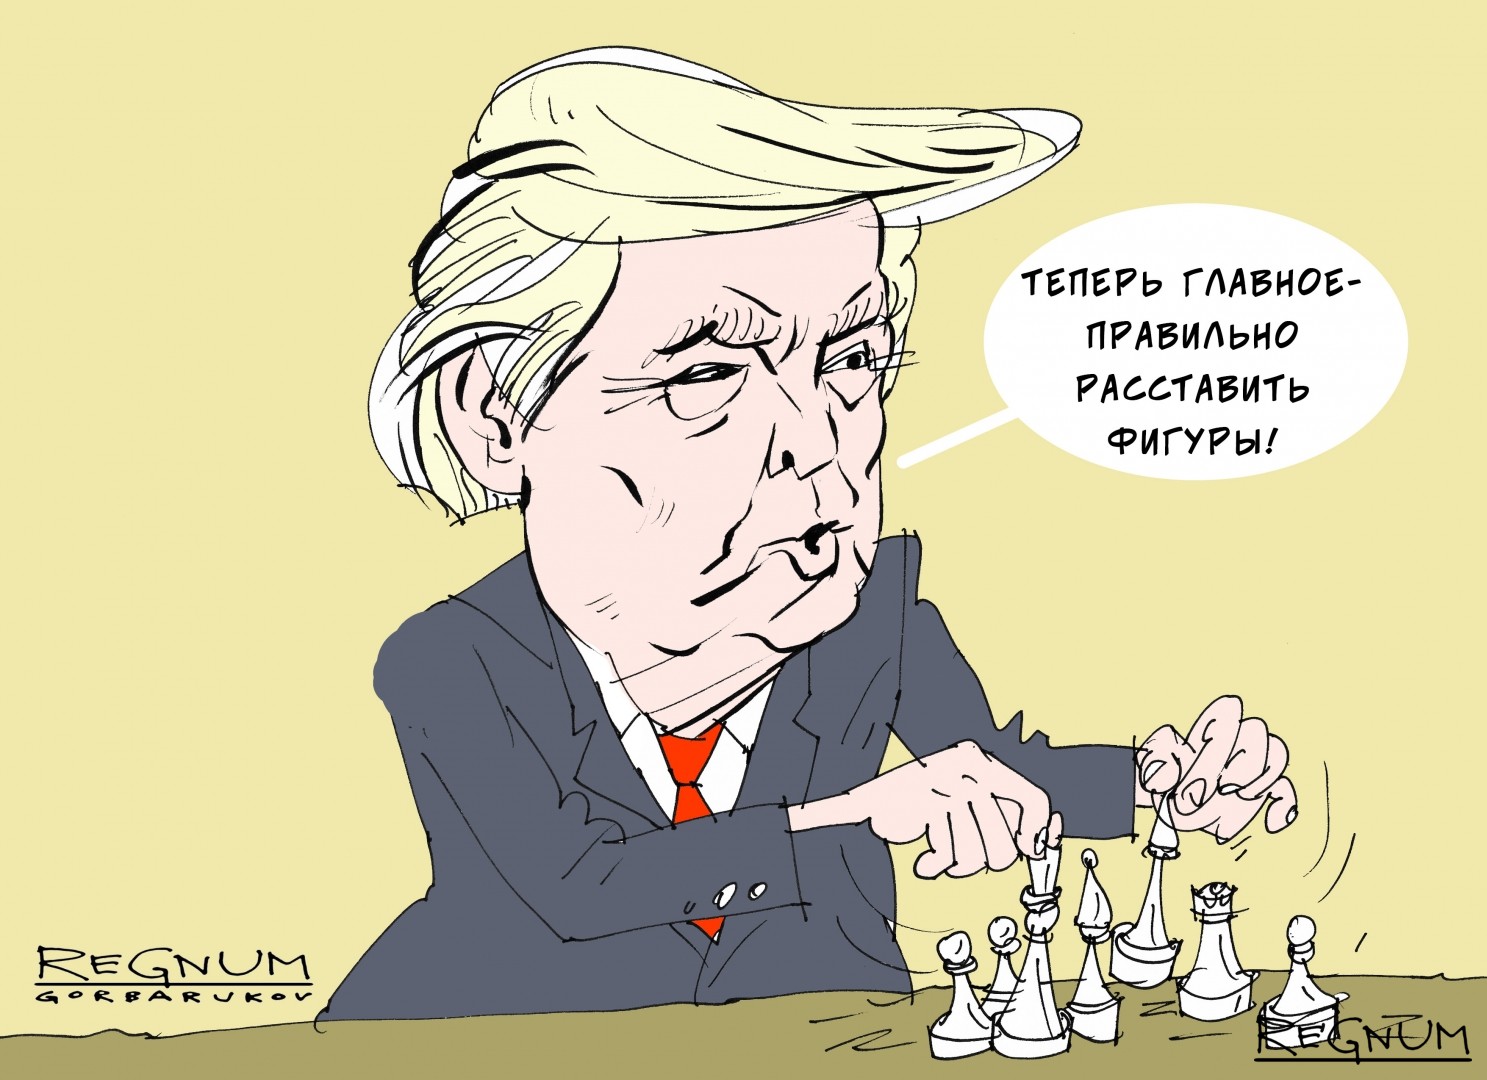 Trump: "Most important now is to position chess figures correctly!" (Russian political cartoon: Gorbarukov, Regnum.ru)